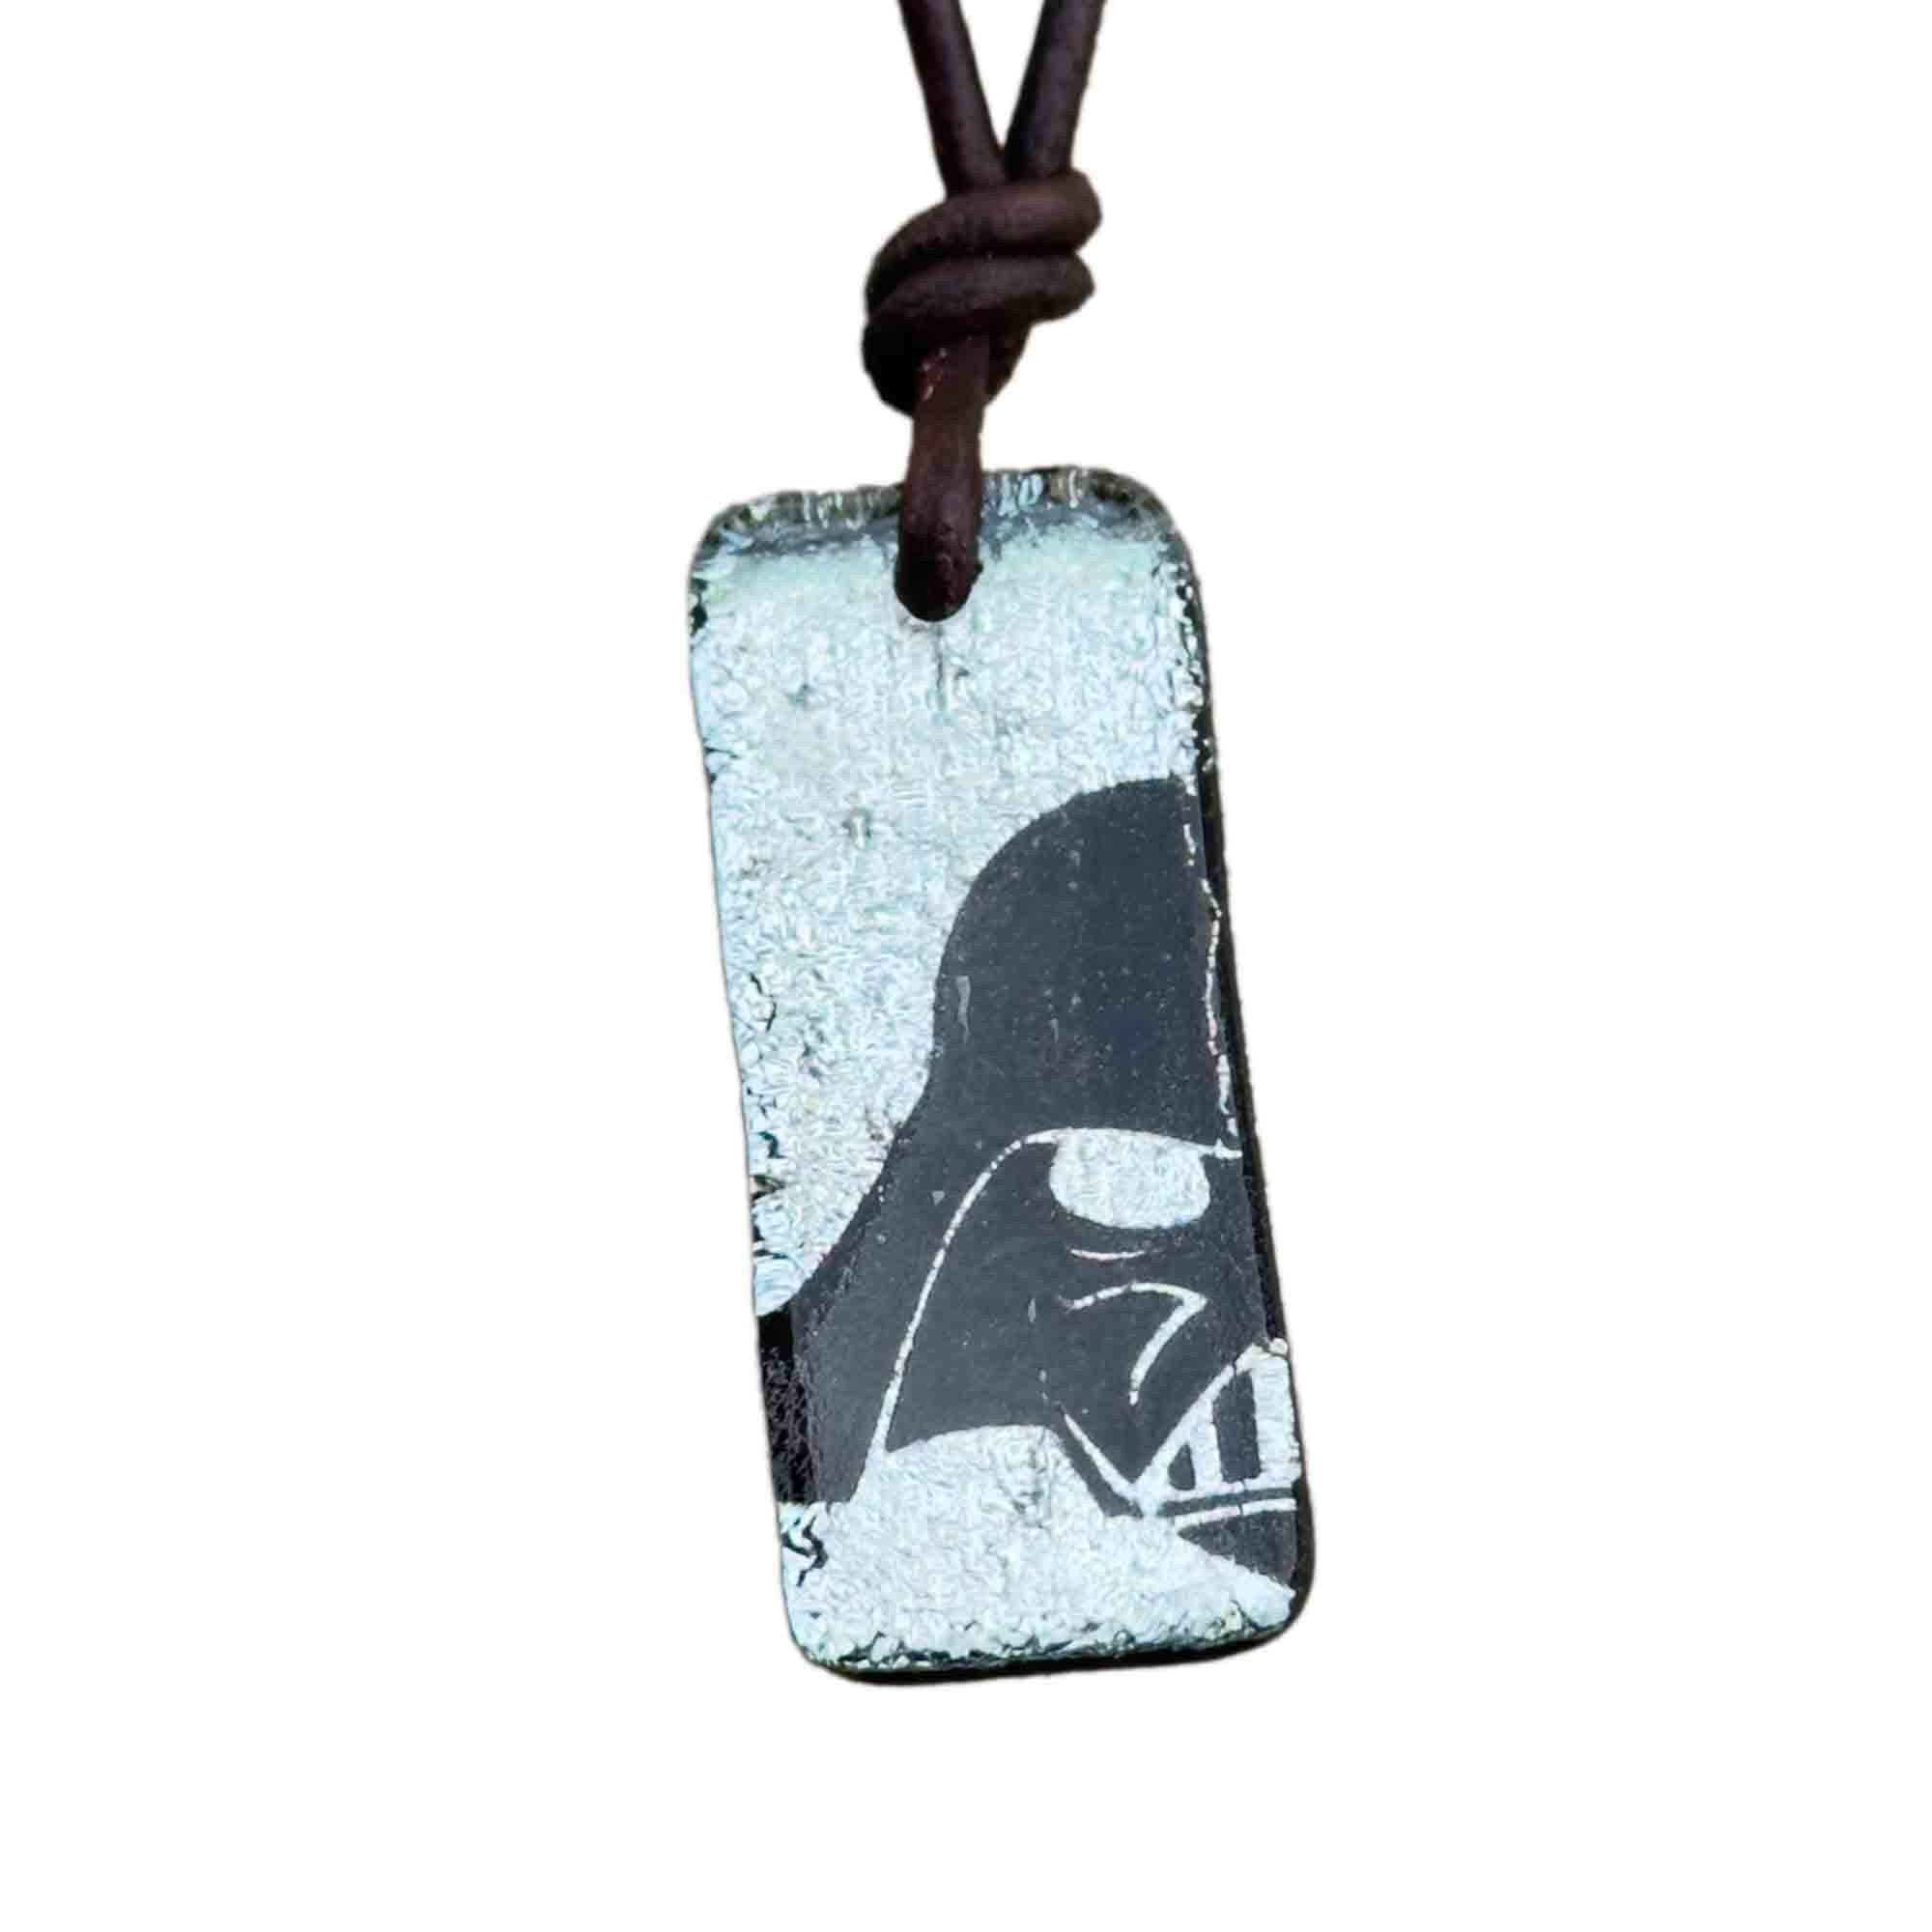 Darth vader helmet necklace silver color fused glass handmade in usa